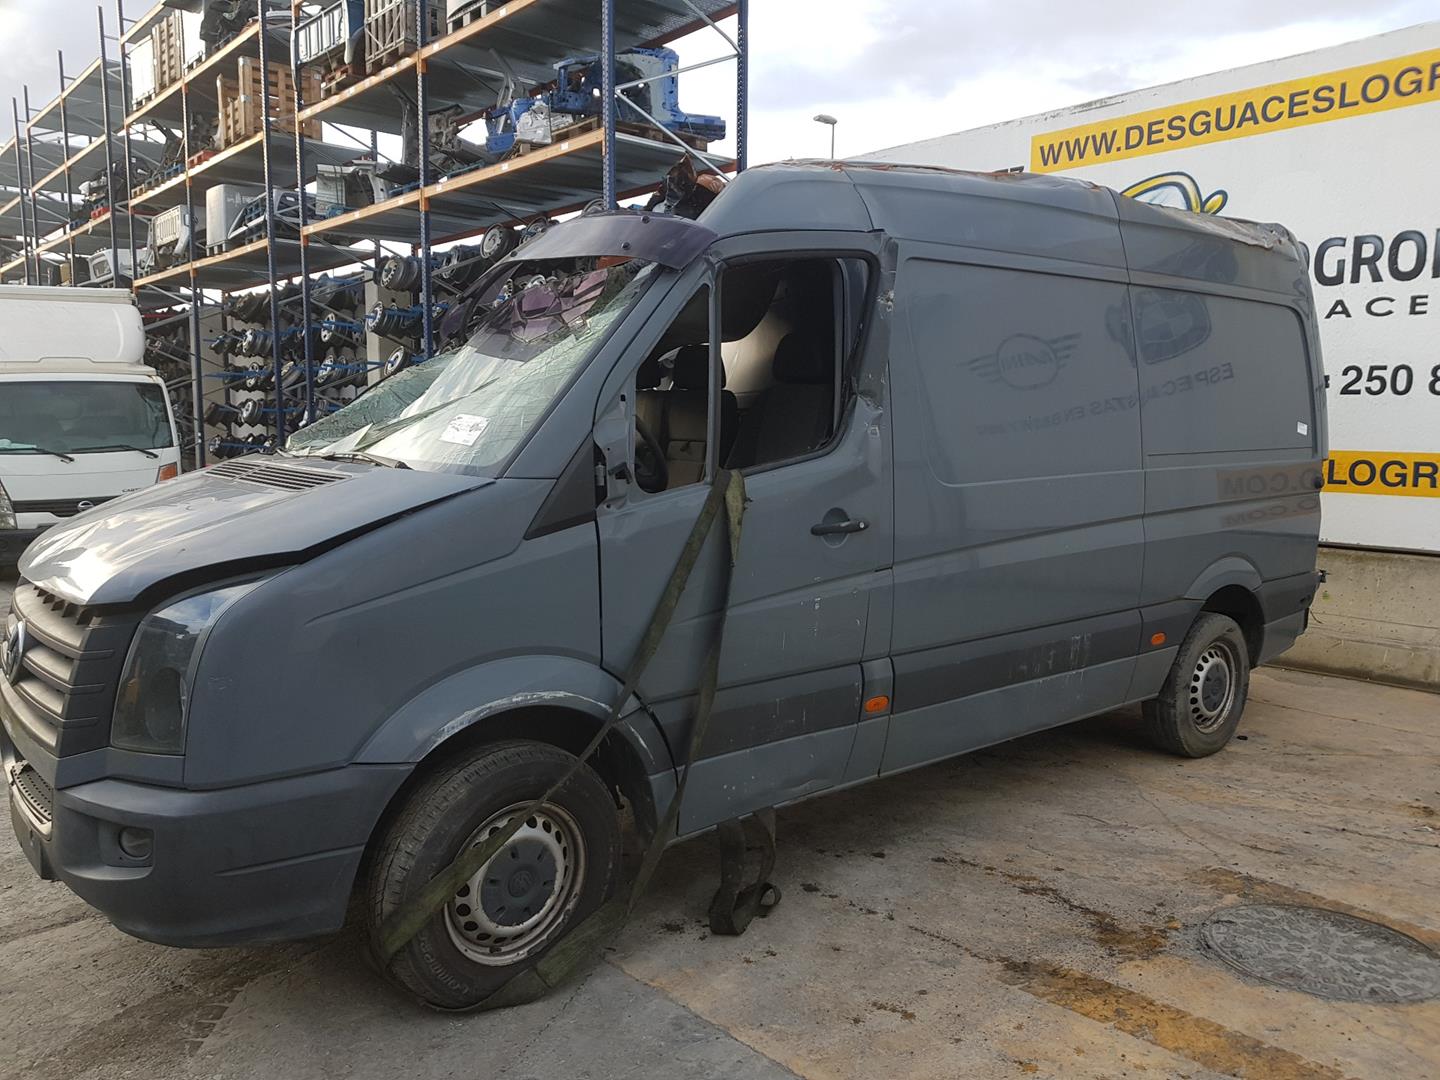 VOLKSWAGEN Crafter 1 generation (2006-2016) Other Trim Parts 2E1853535BJ, A9066900800 19784438